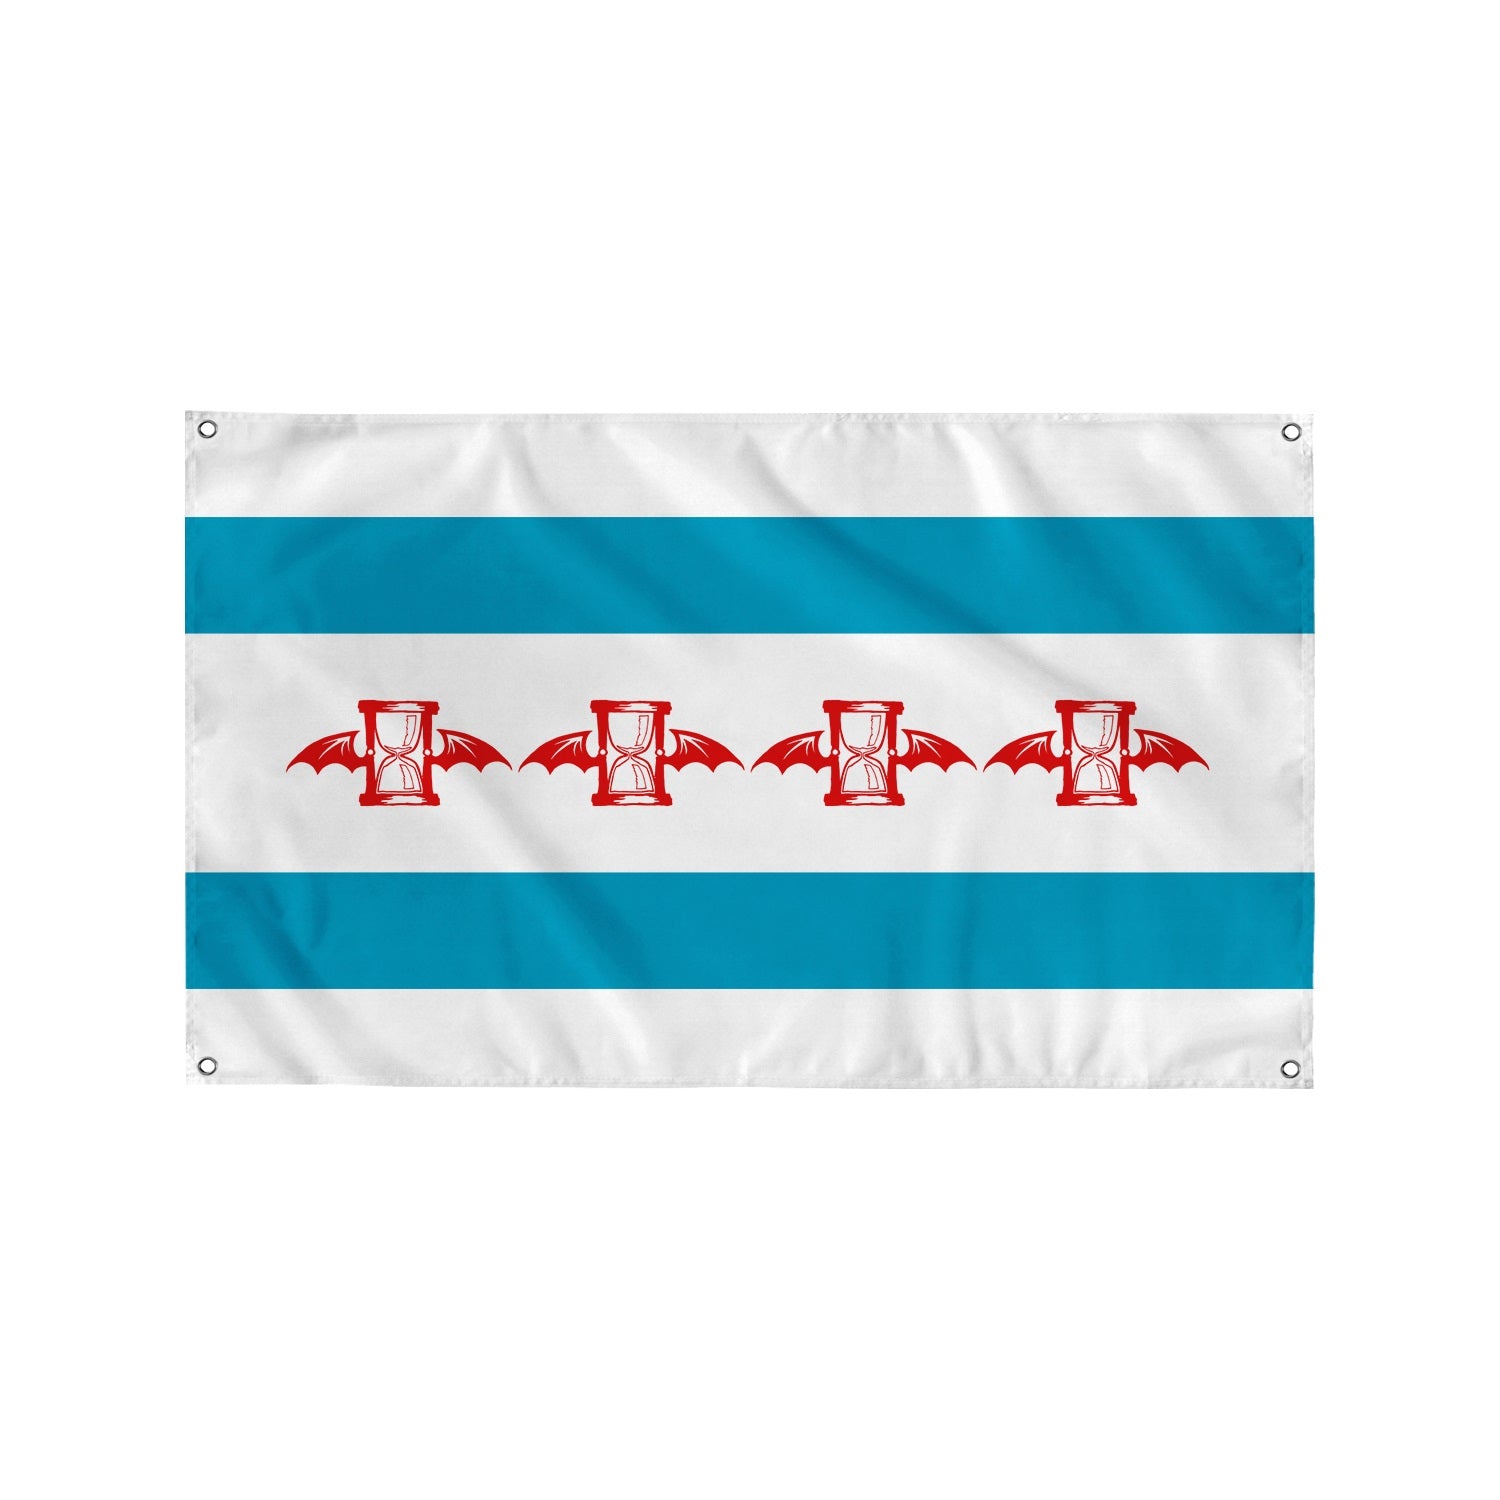 Image of a white wall flag against a white background. The wall flag features two blue stripes- one across the top and one across the bottom of the flag. The center, a white stripe, features four of the same logos for the lawrence arms. The logo is an hourglass with wings in the color red.